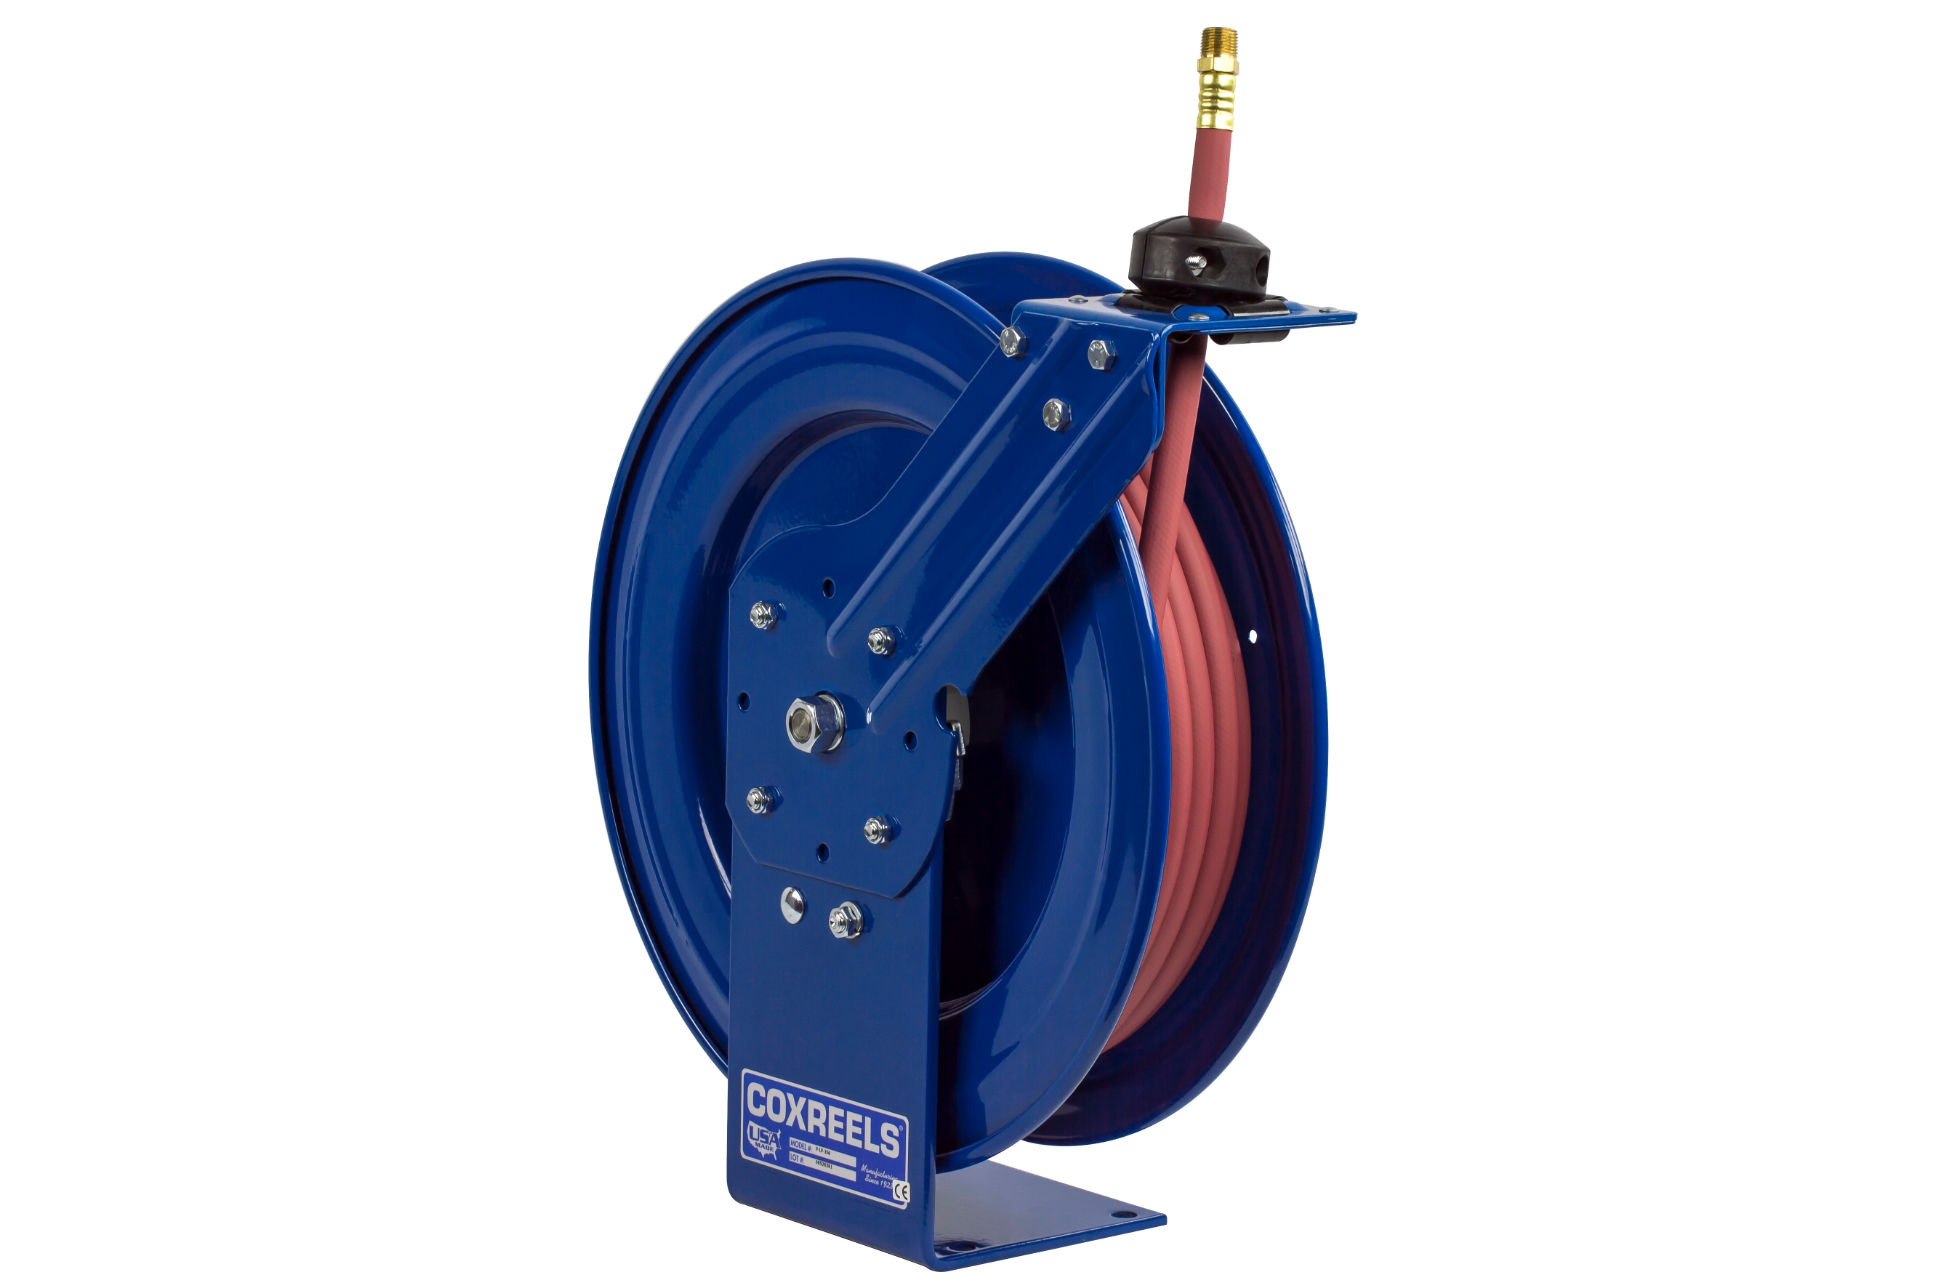 Spring Driven Hose Reels - Mountable (No-Weld) - Cut and Couple